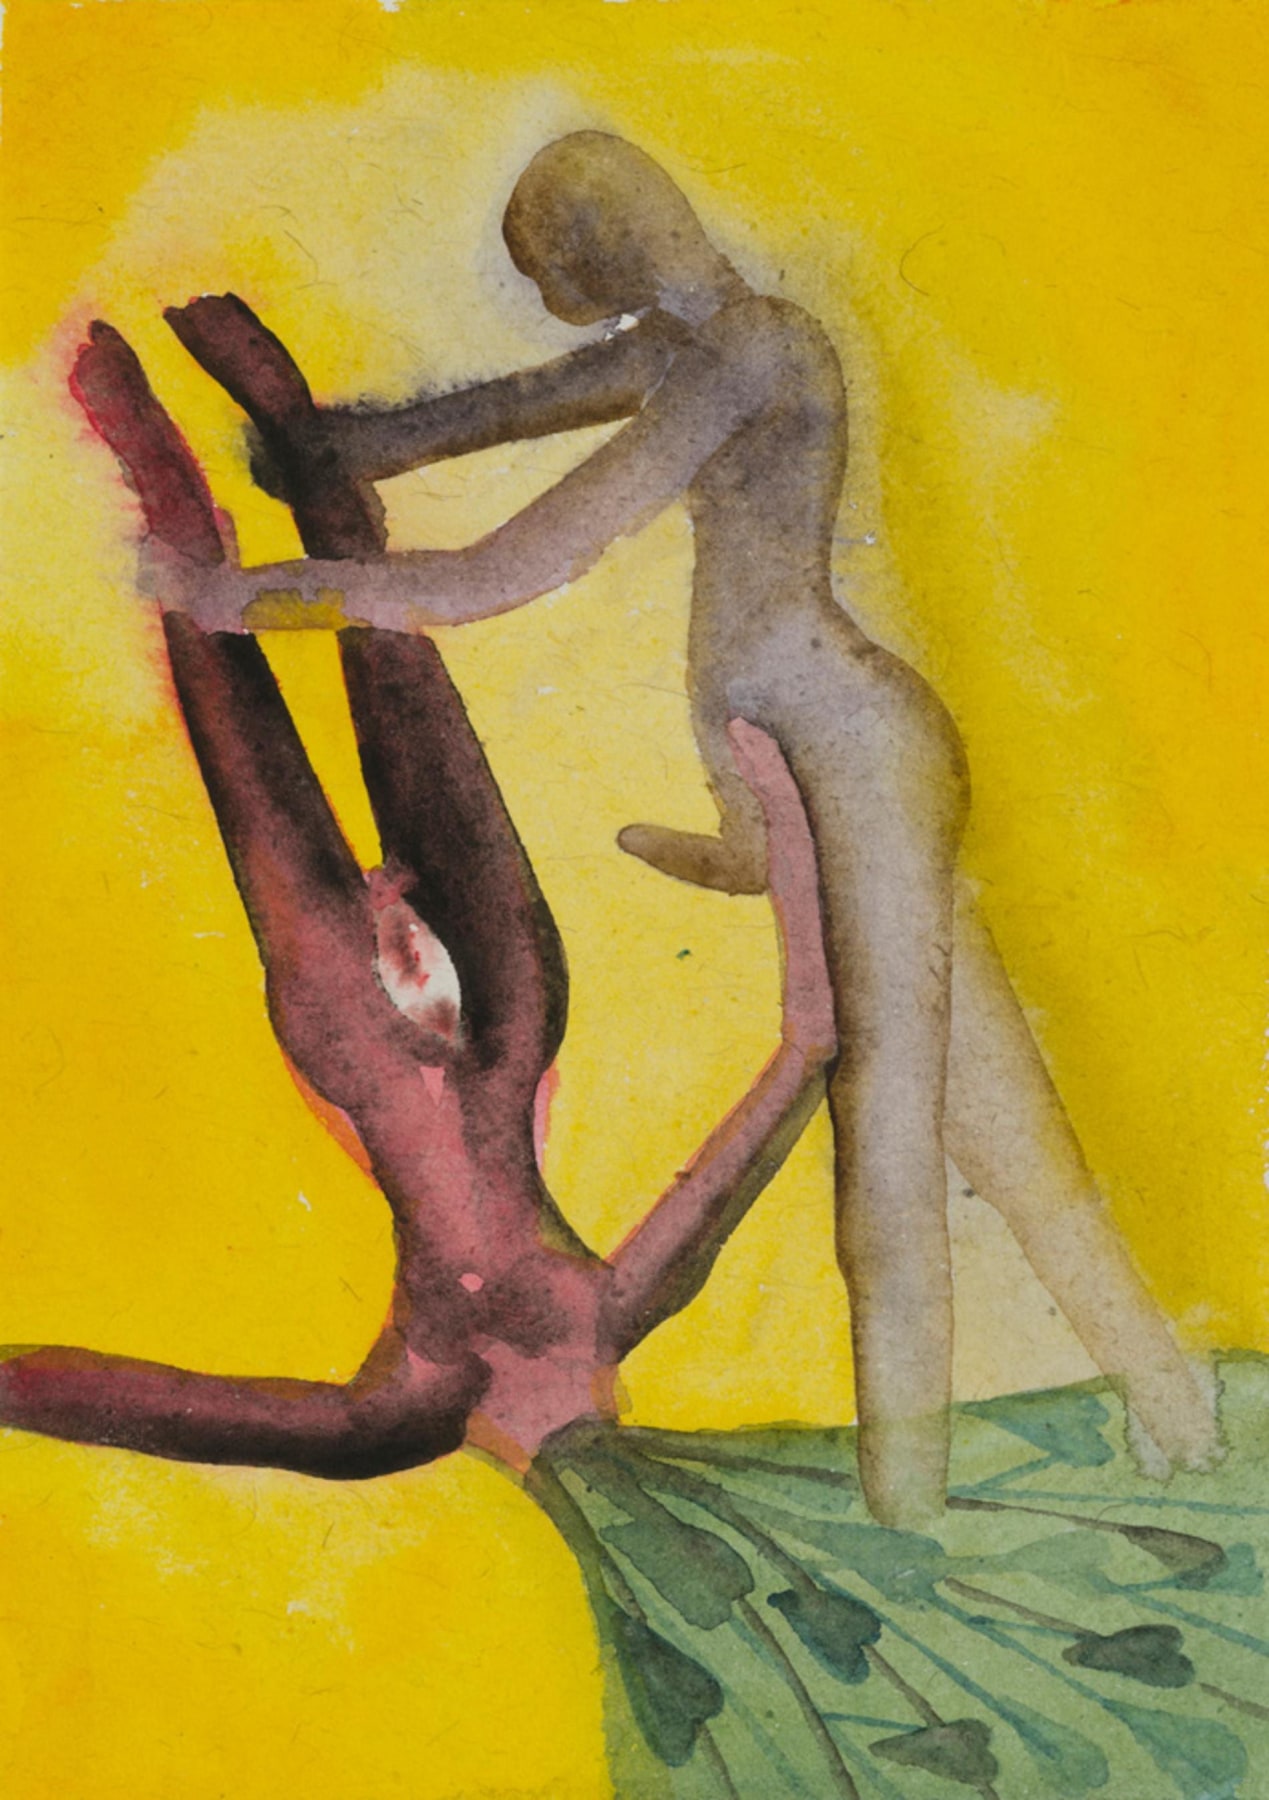 Image of FRANCESCO CLEMENTE's A Story Well Told (09), 2013